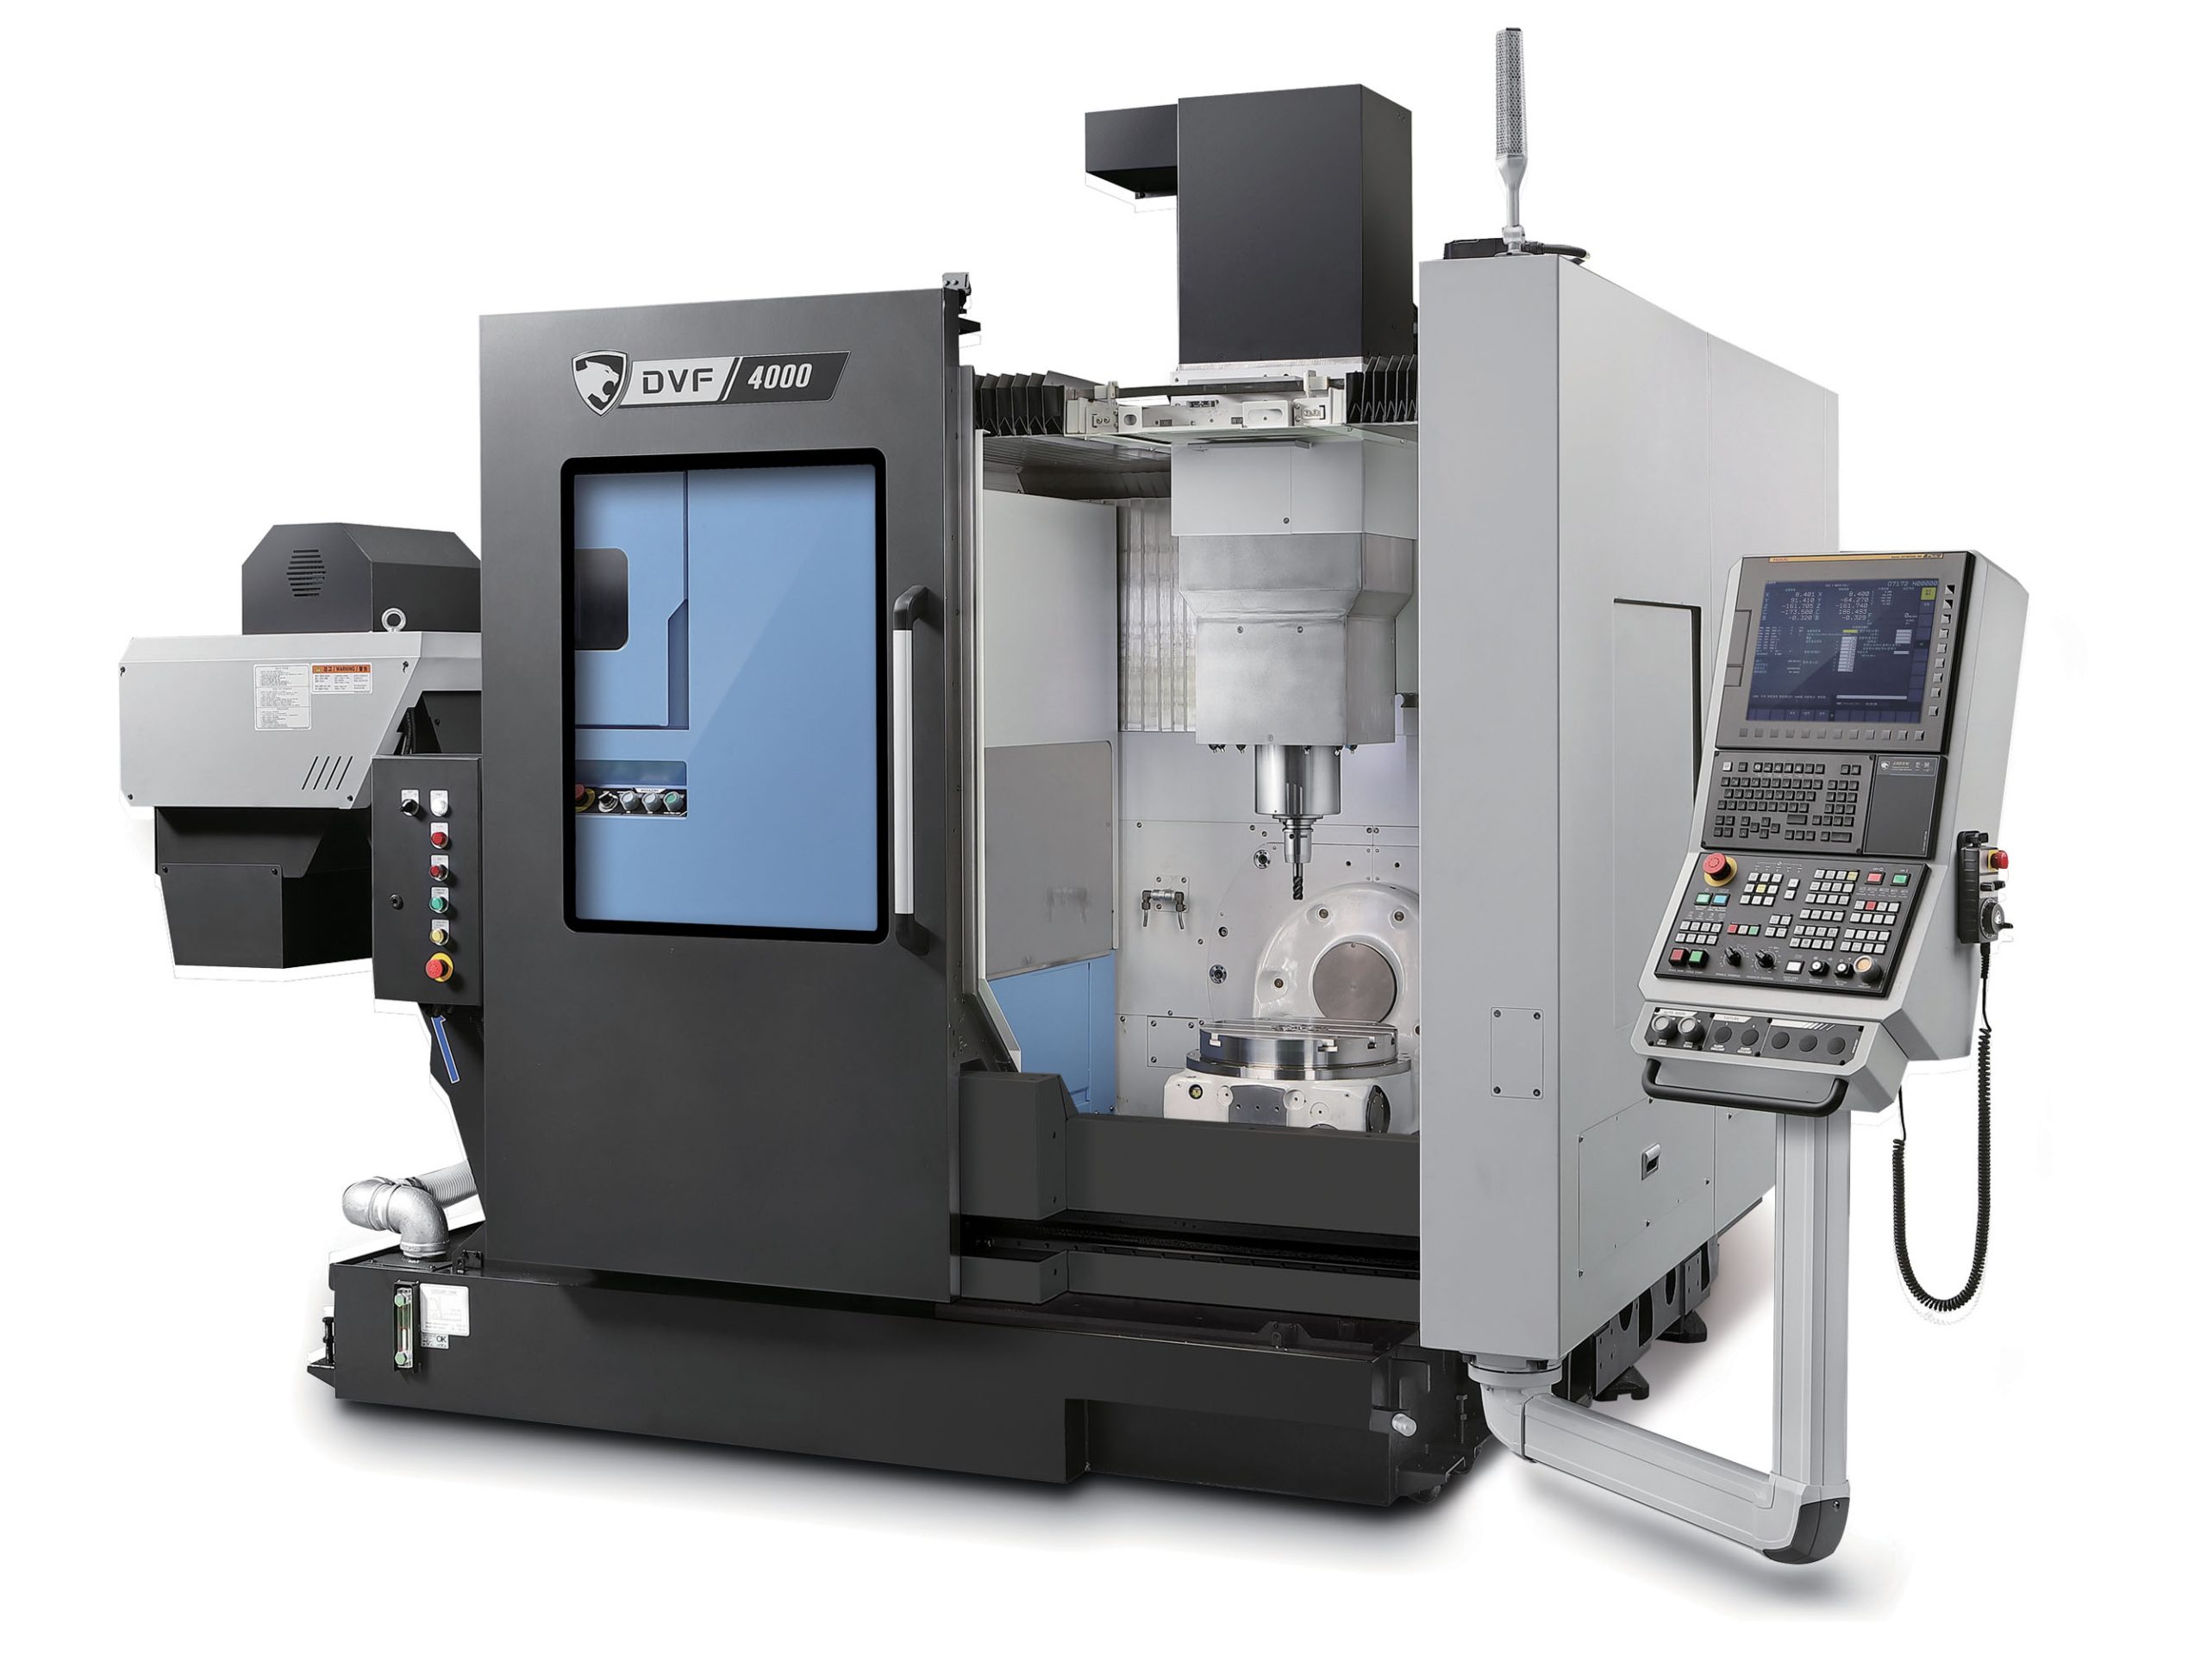 Side view of DN Solutions DVF 4000 5 axis machining centre